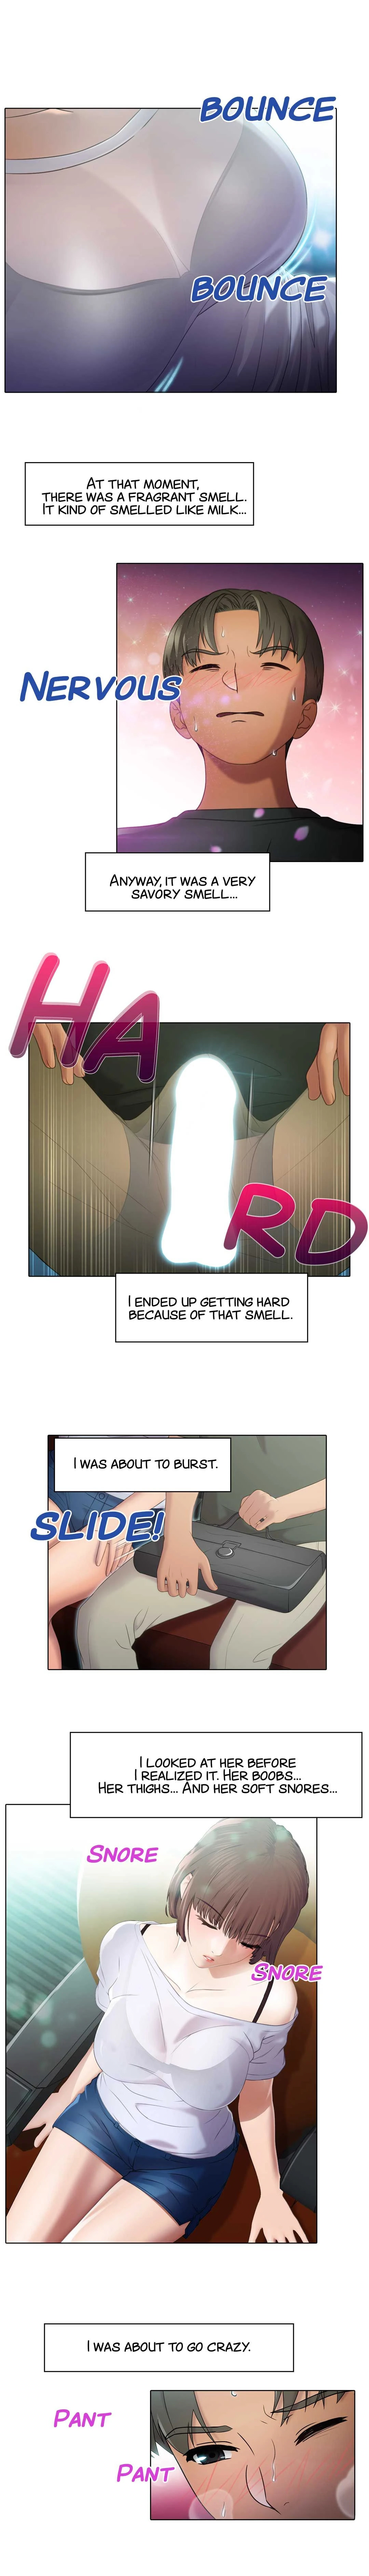 Inside the bus - Chapter 1 Page 5